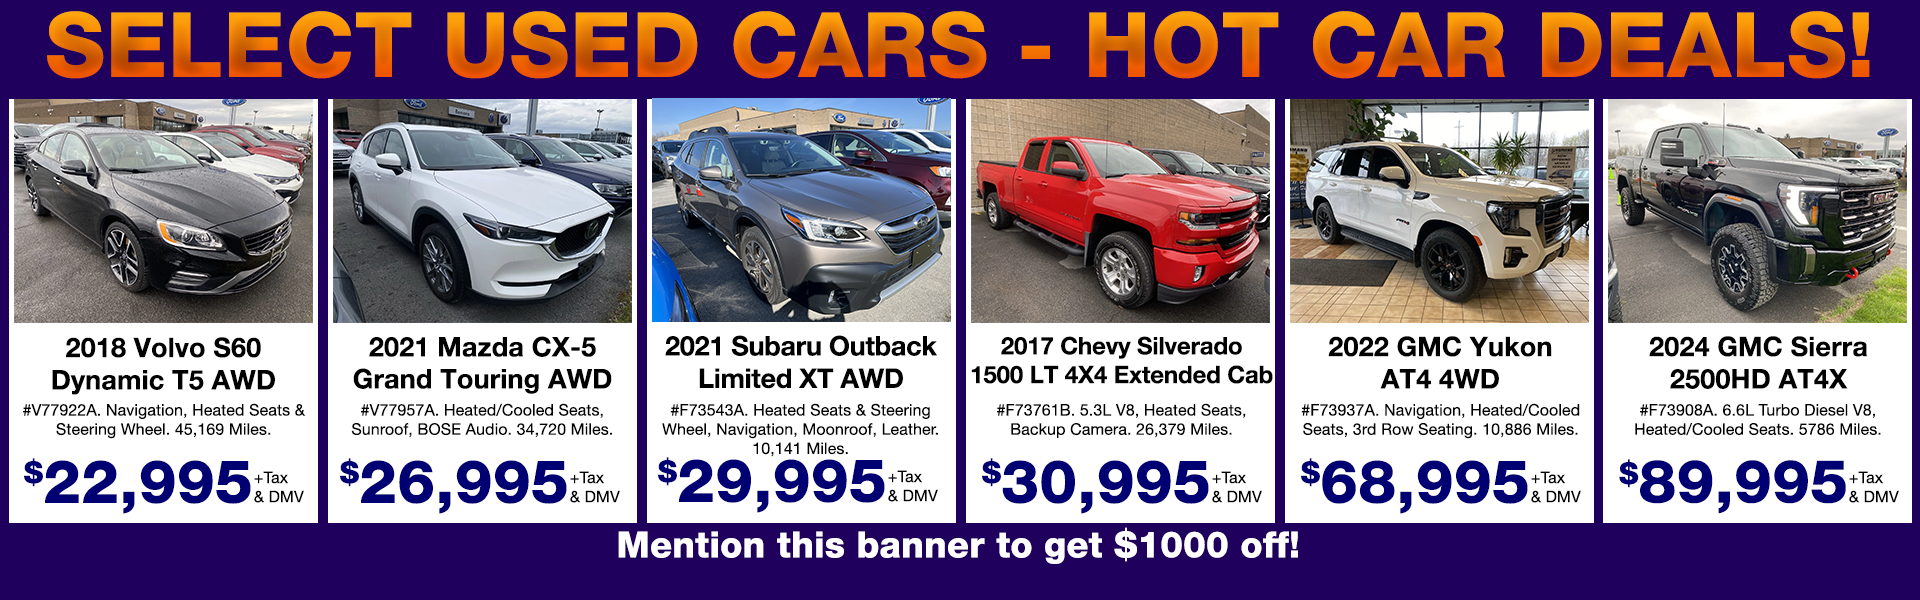 Great Deals on Used Cars